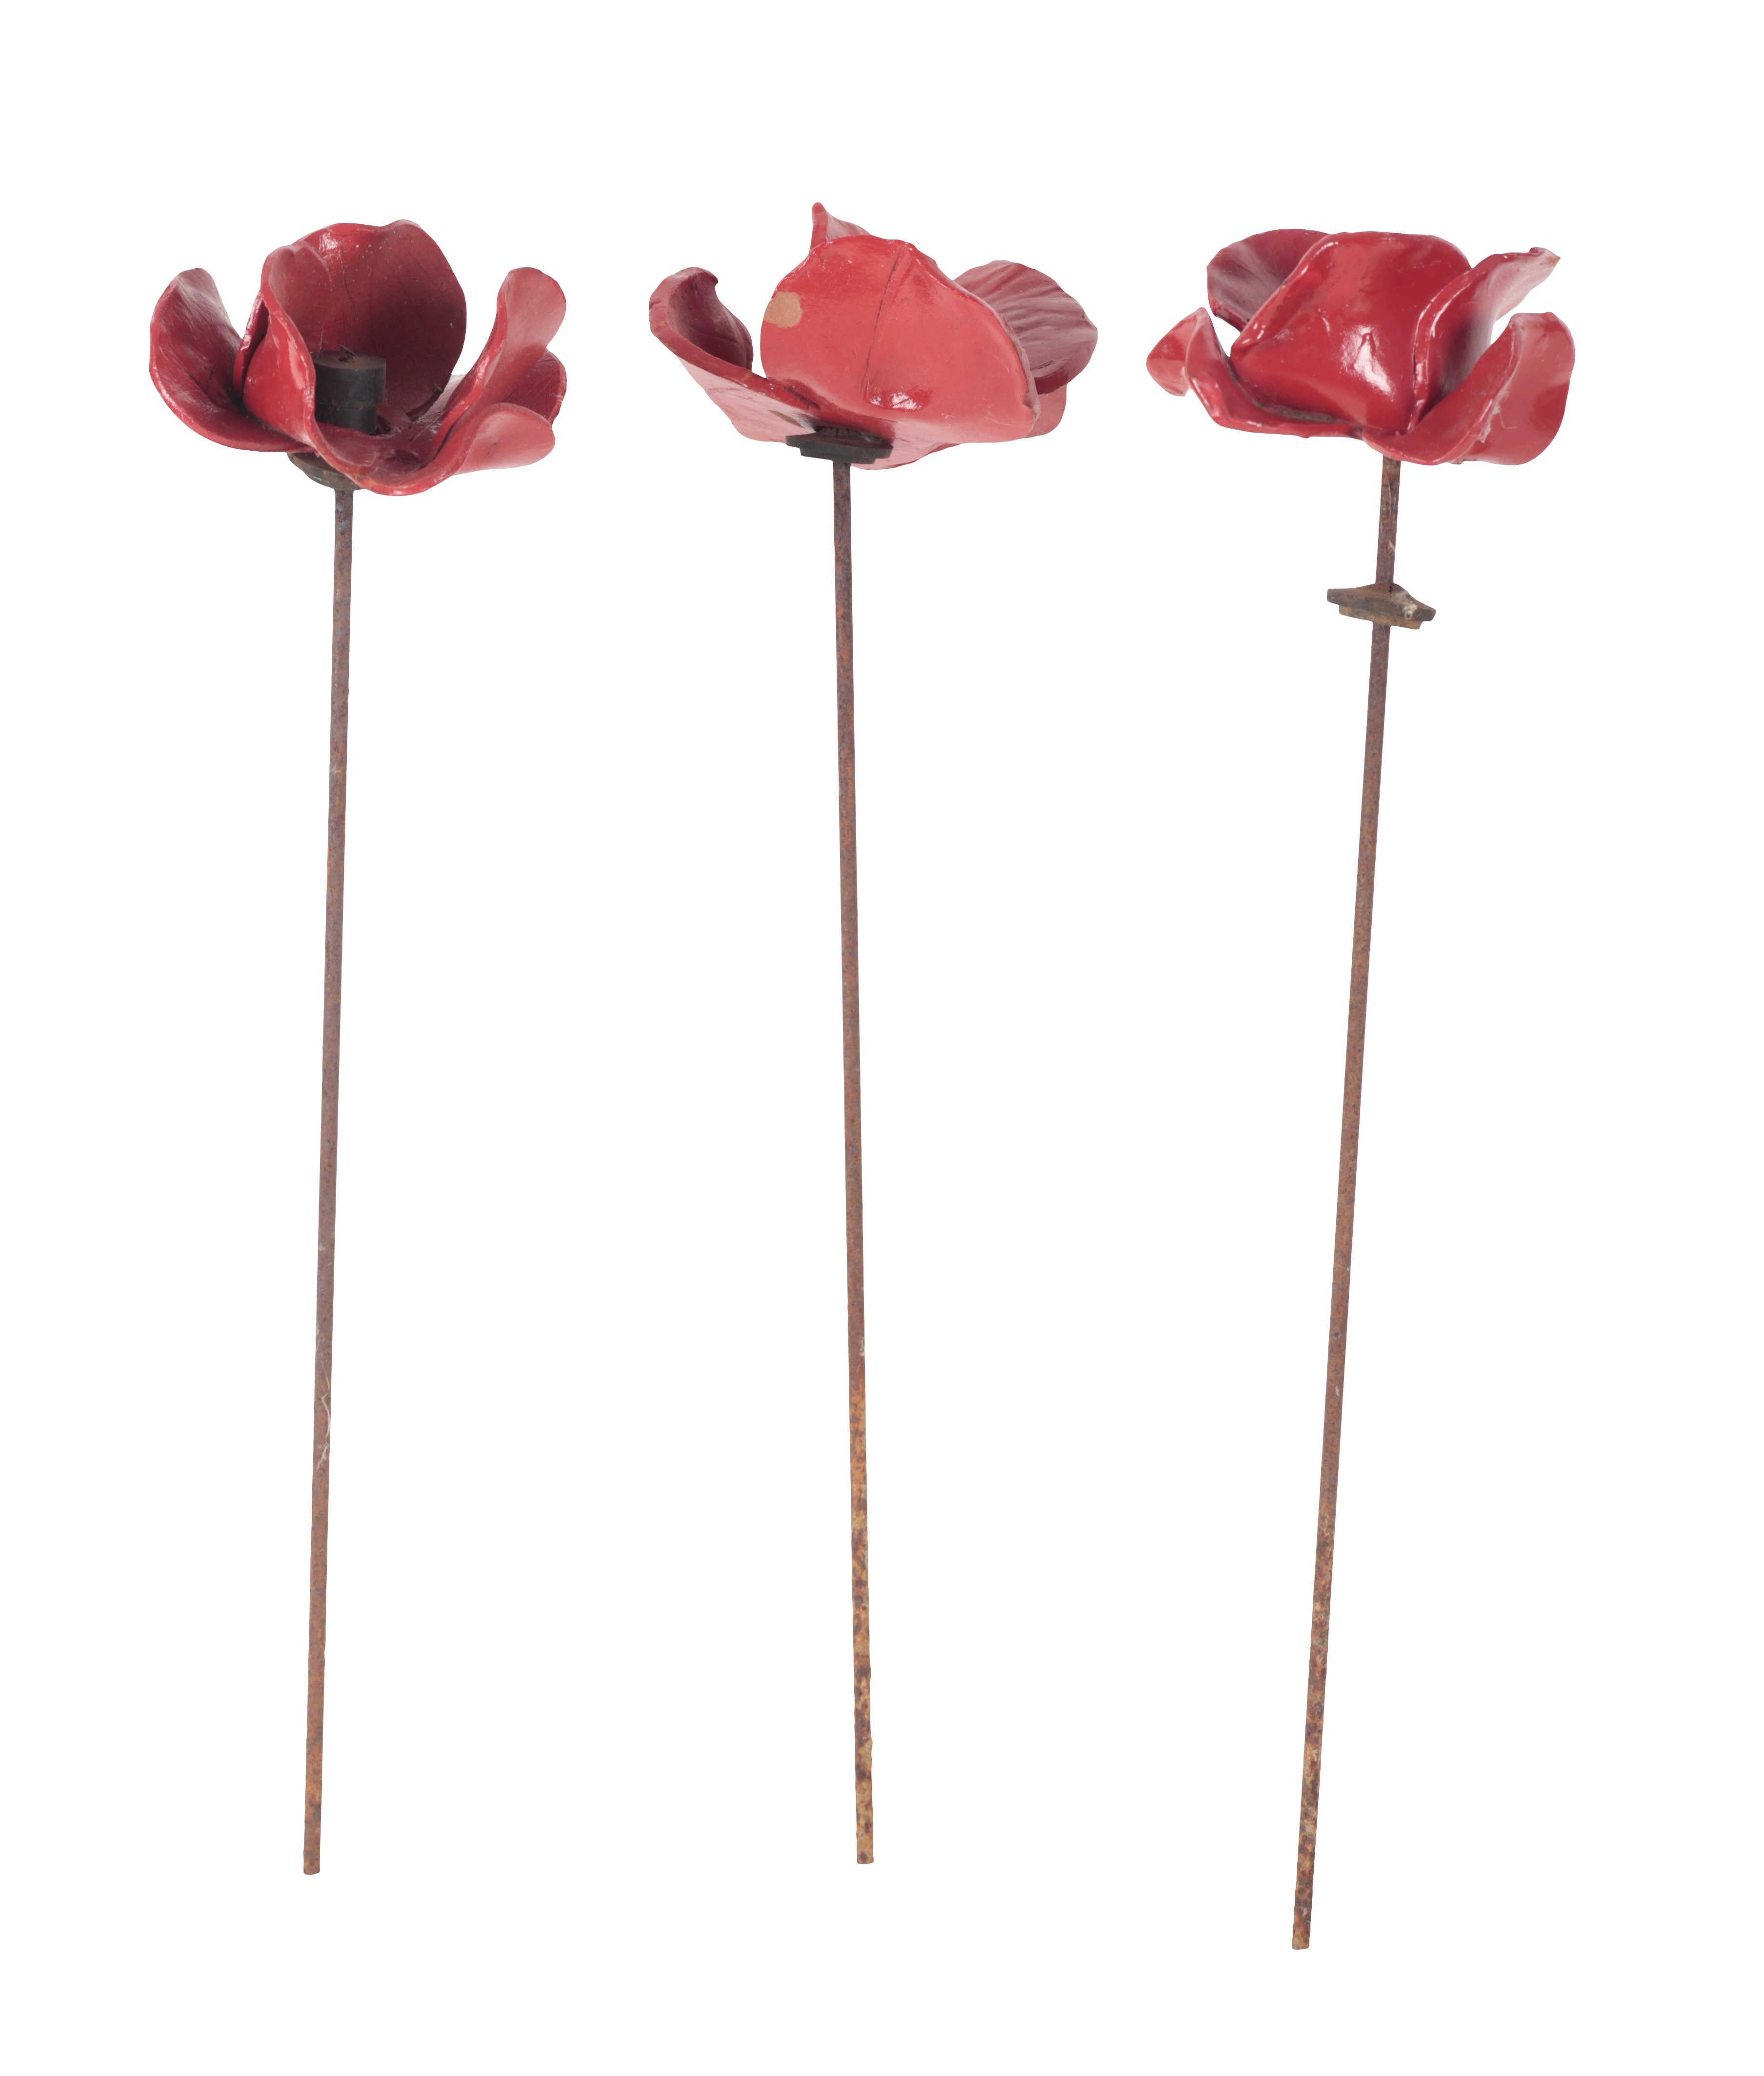 A COLLECTION OF CERAMIC POPPIES AFTER THOSE DESIGNED FOR THE TOWER OF LONDON BY PAUL CUMMINS - Image 2 of 2